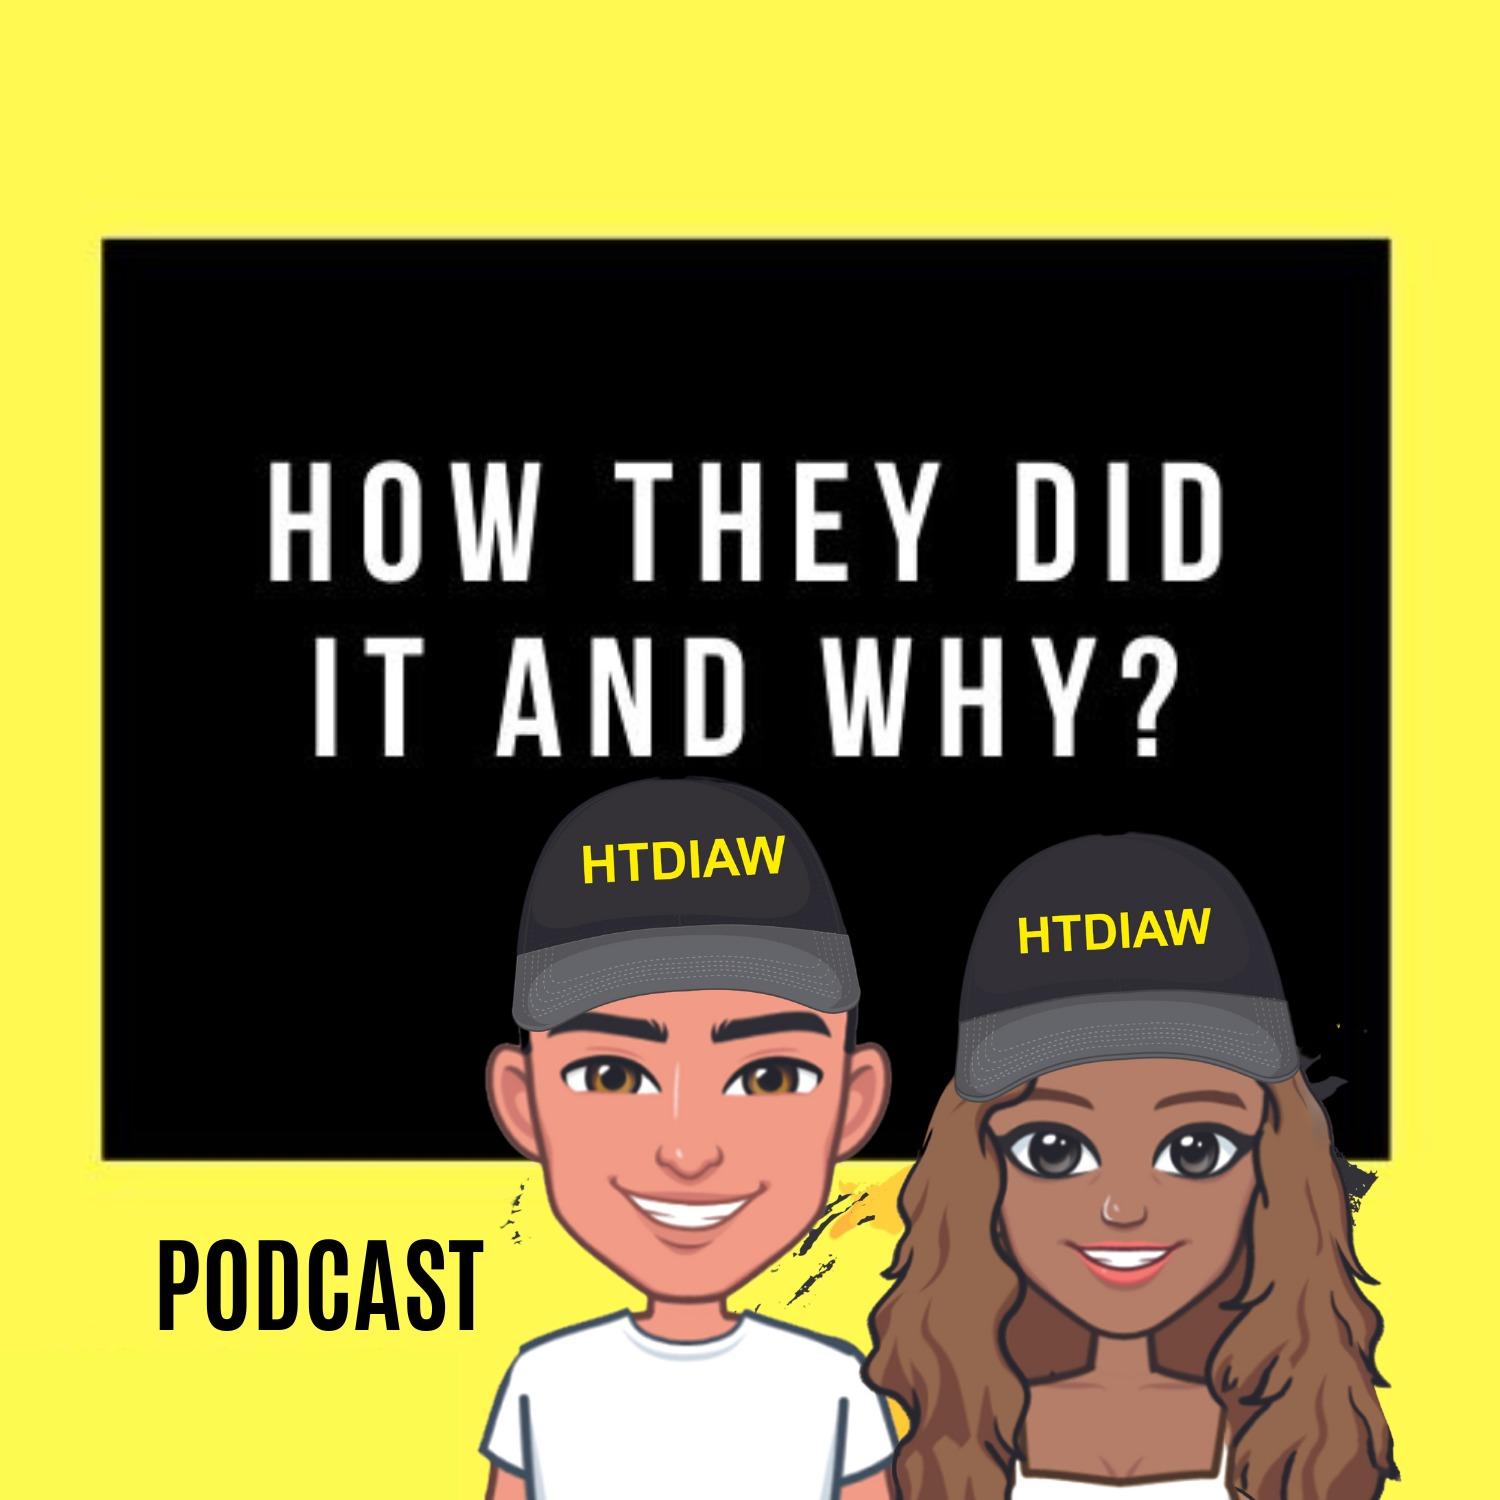 HOW THEY DID IT AND WHY PODCAST